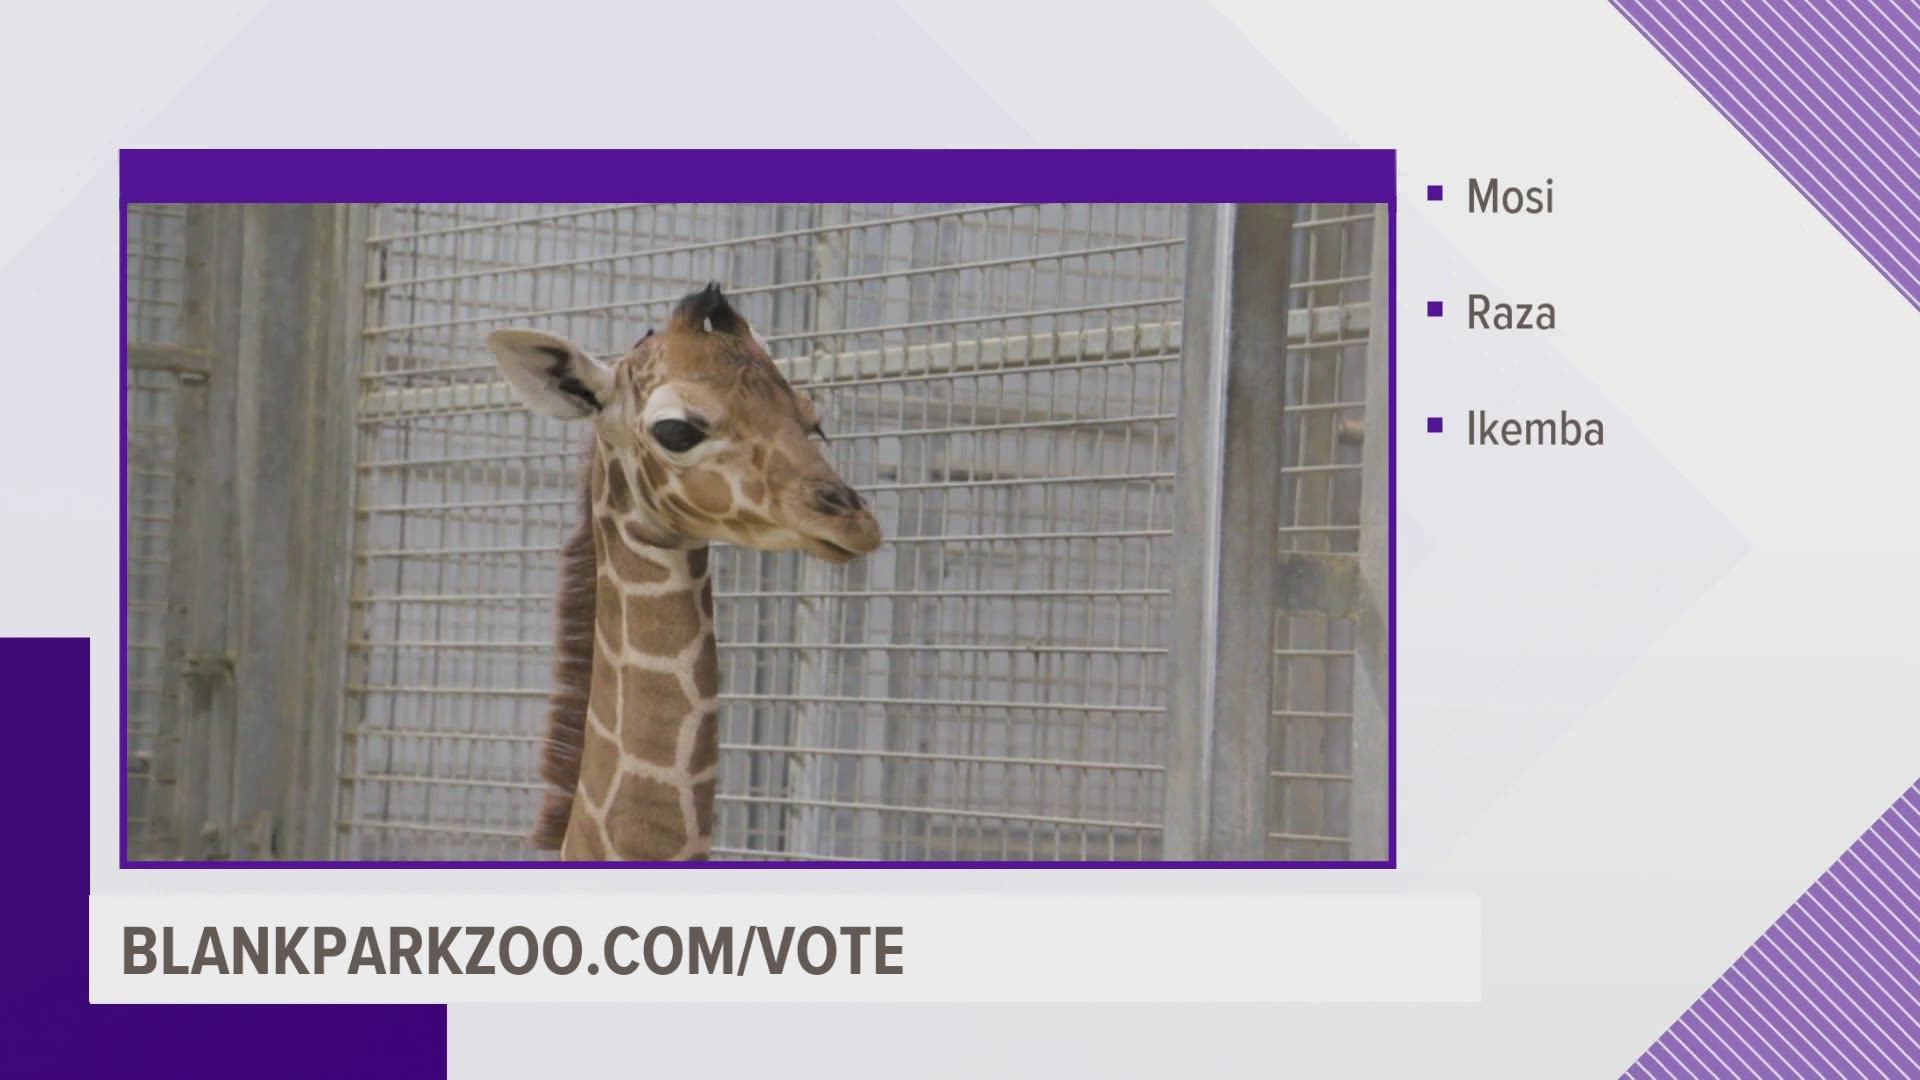 The Blank Park Zoo is asking for the public's help in voting on the name of their new baby giraffe.